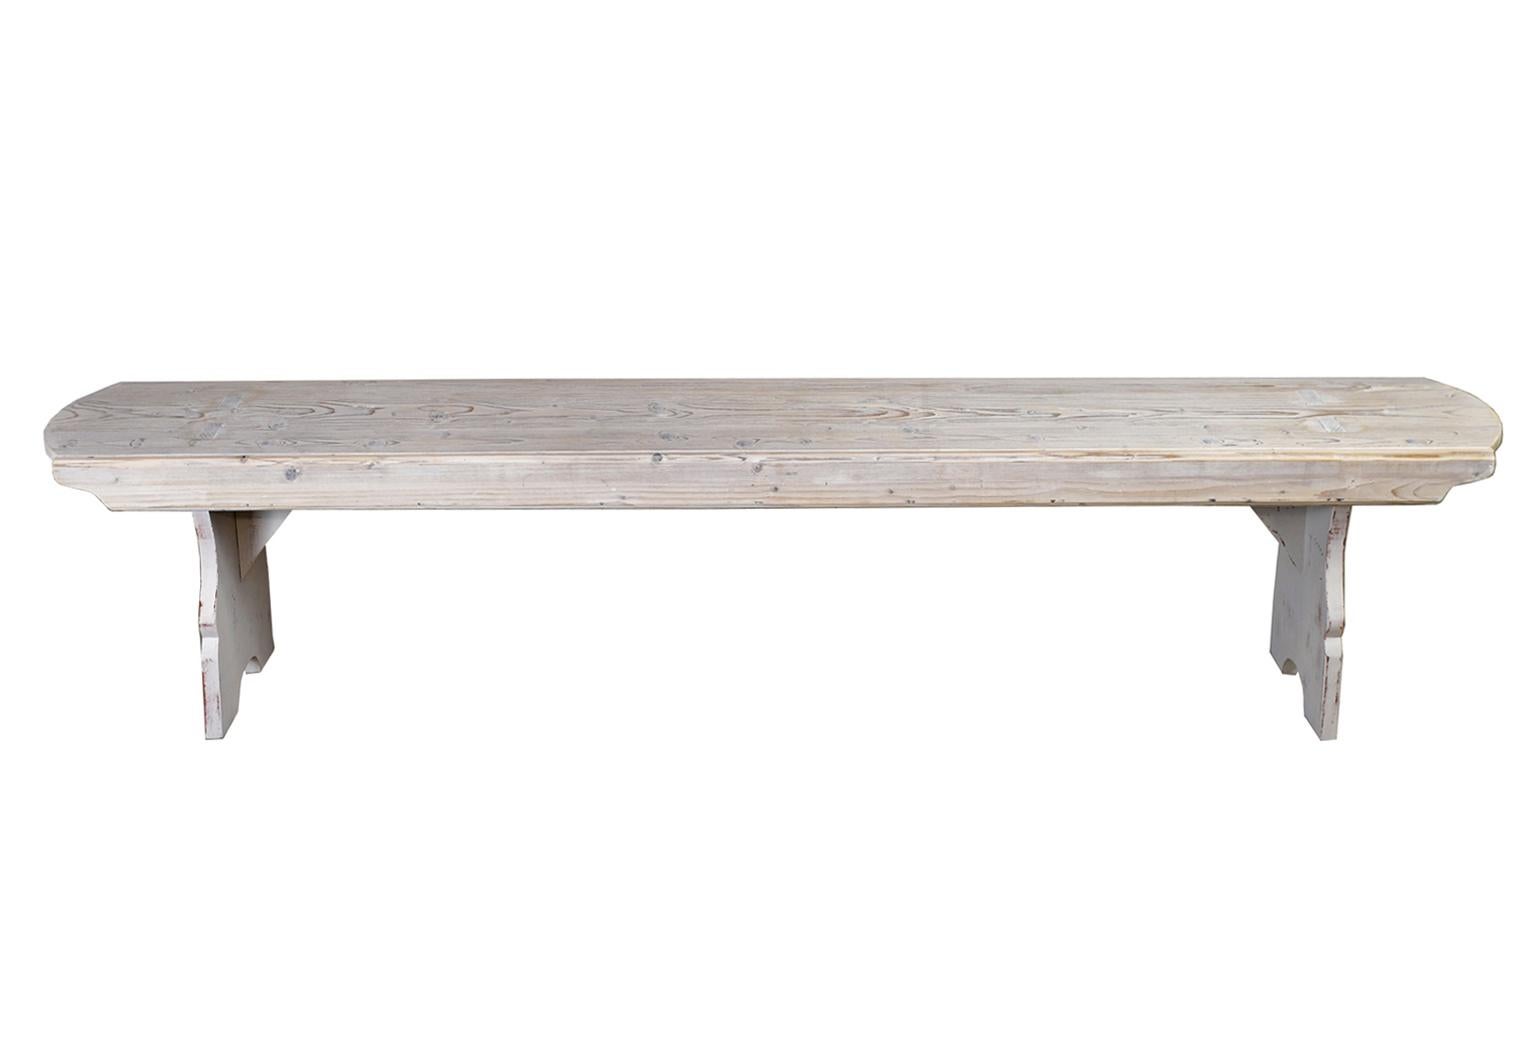 Shown in repurposed pine with a limed white chalk finish, this Bonnin Ashley custom made bench can be ordered in other woods and with a variety of finishes. Handcrafted in our workshop using mortise-and-tenon joinery followed by a hand-applied